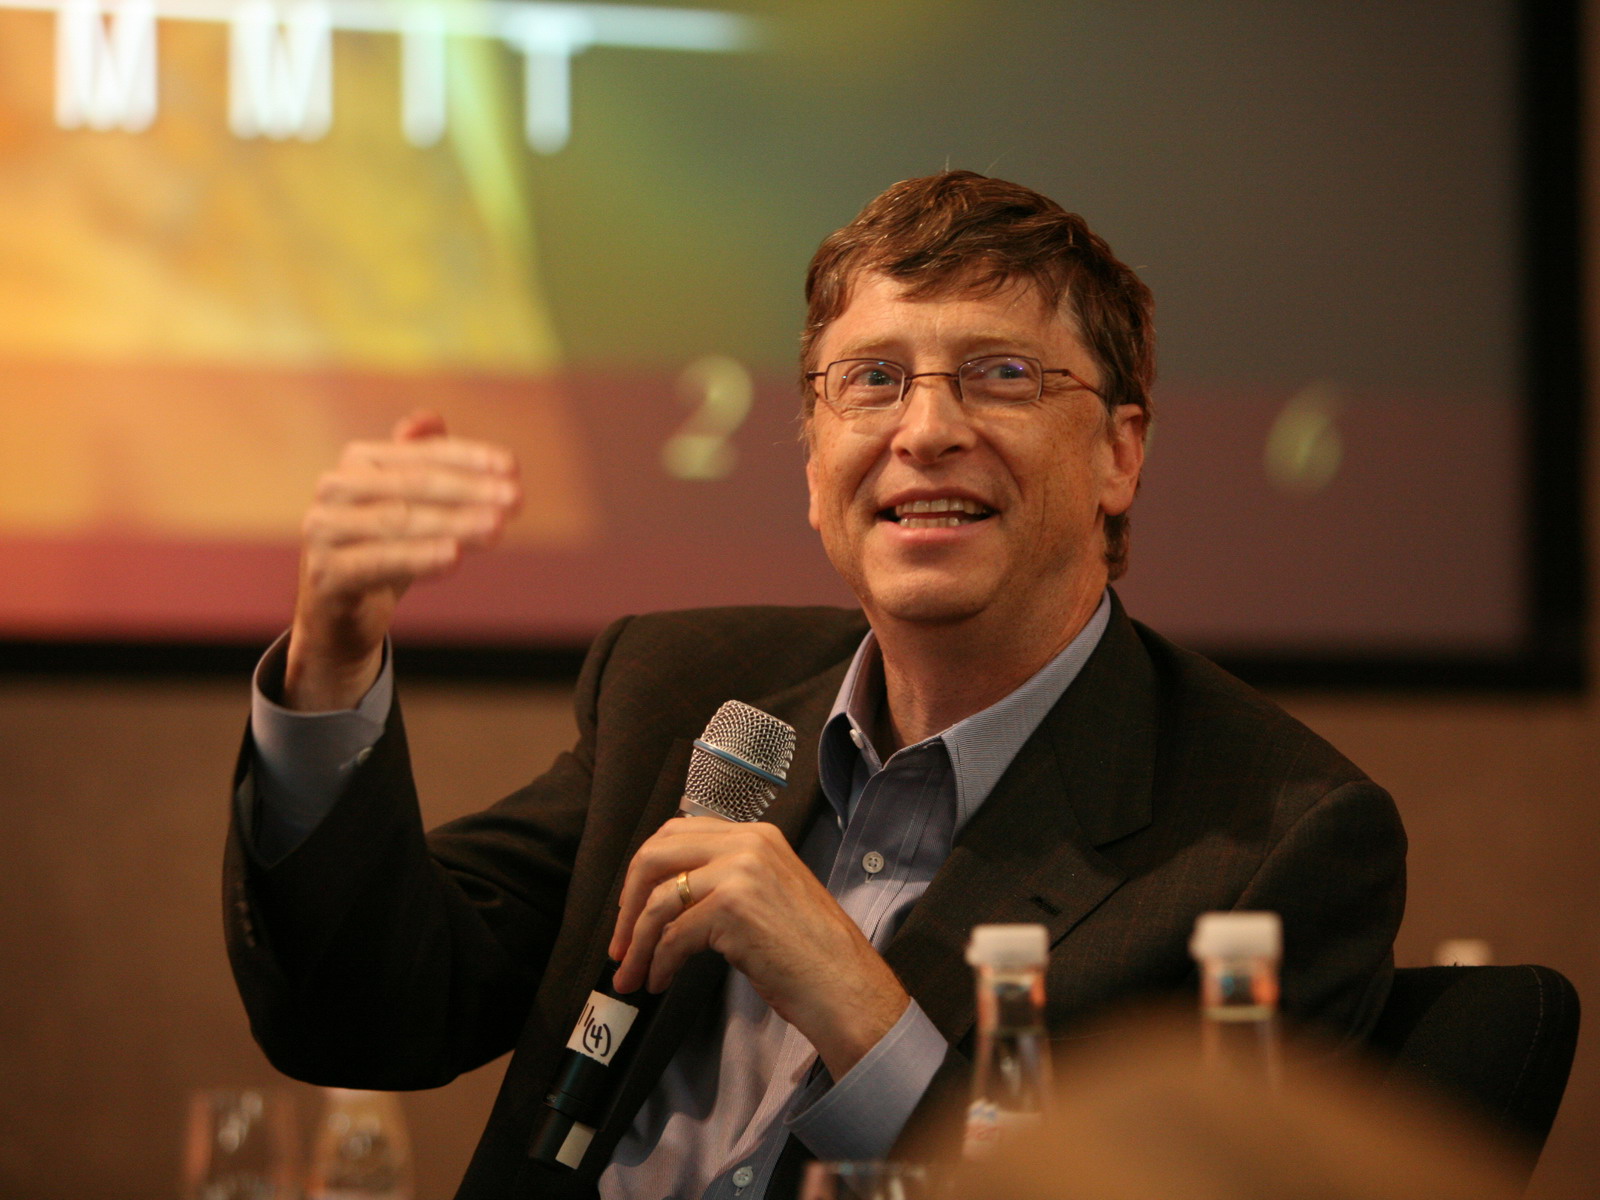 bill gates net worth 2012 forbes and hd wallpapers download 1600x1200